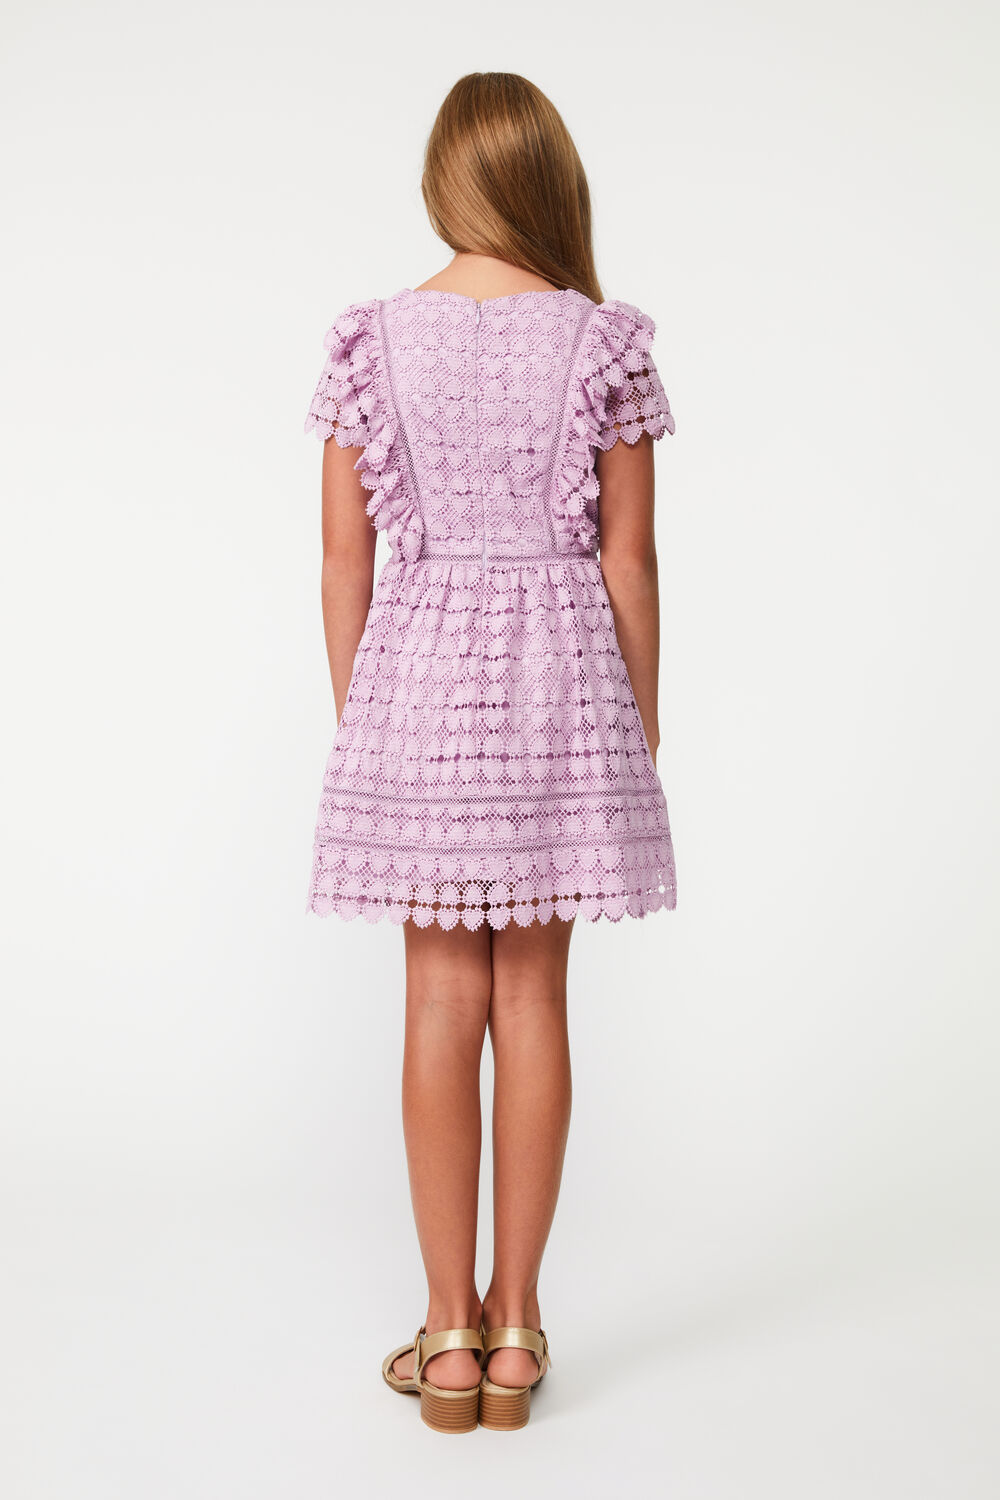 Girls HEART LACE DRESS in colour PETAL PINK